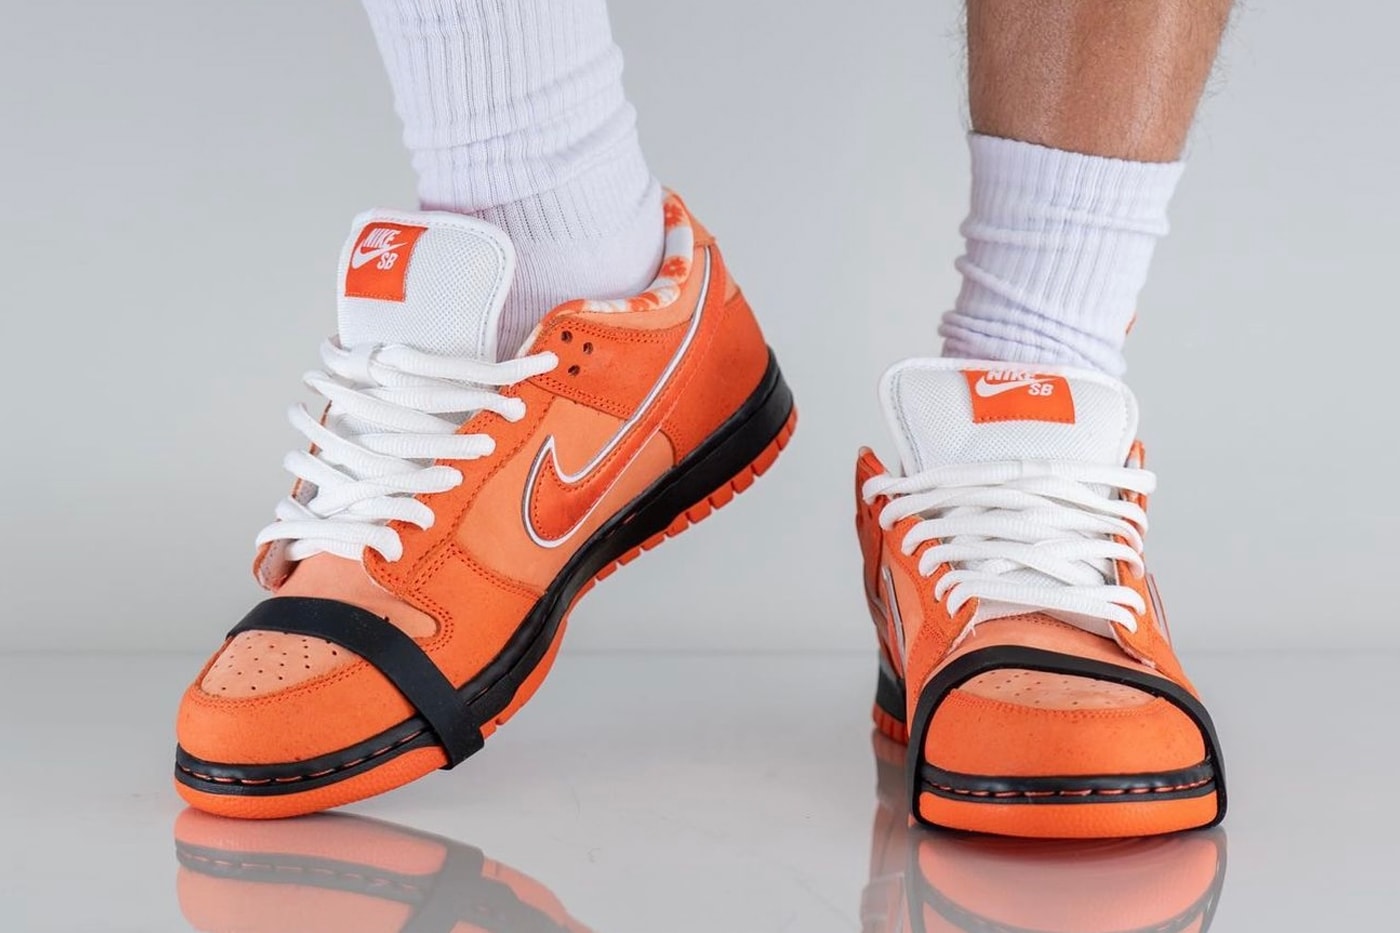 Concepts x Nike SB Dunk Low Orange Lobster On-Foot Look